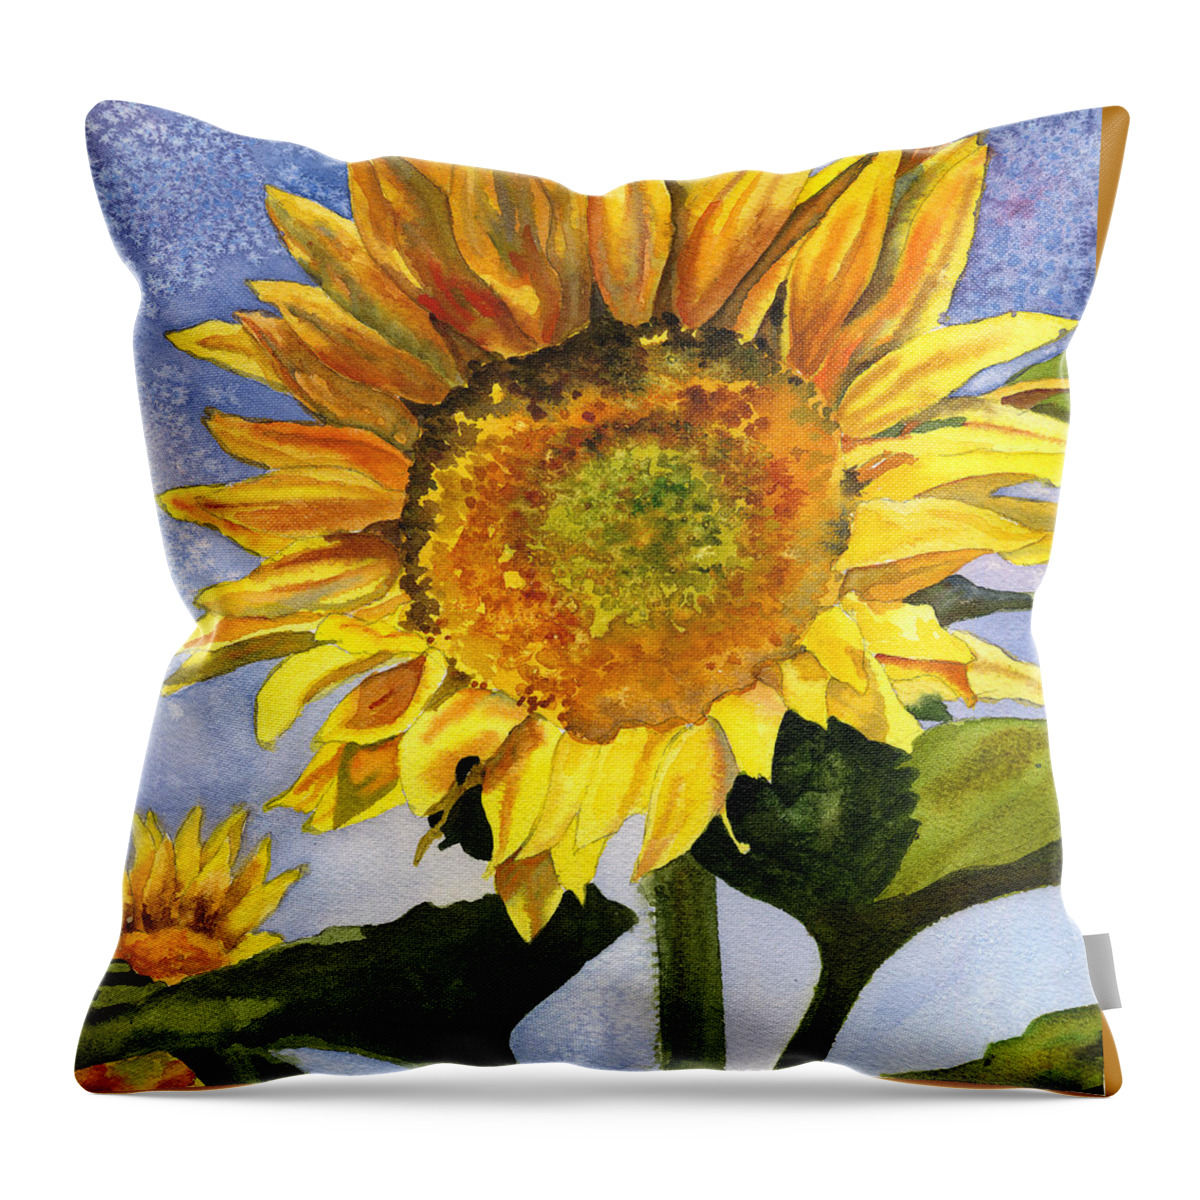 Sunflower Painting Throw Pillow featuring the painting Sunflowers II by Anne Gifford